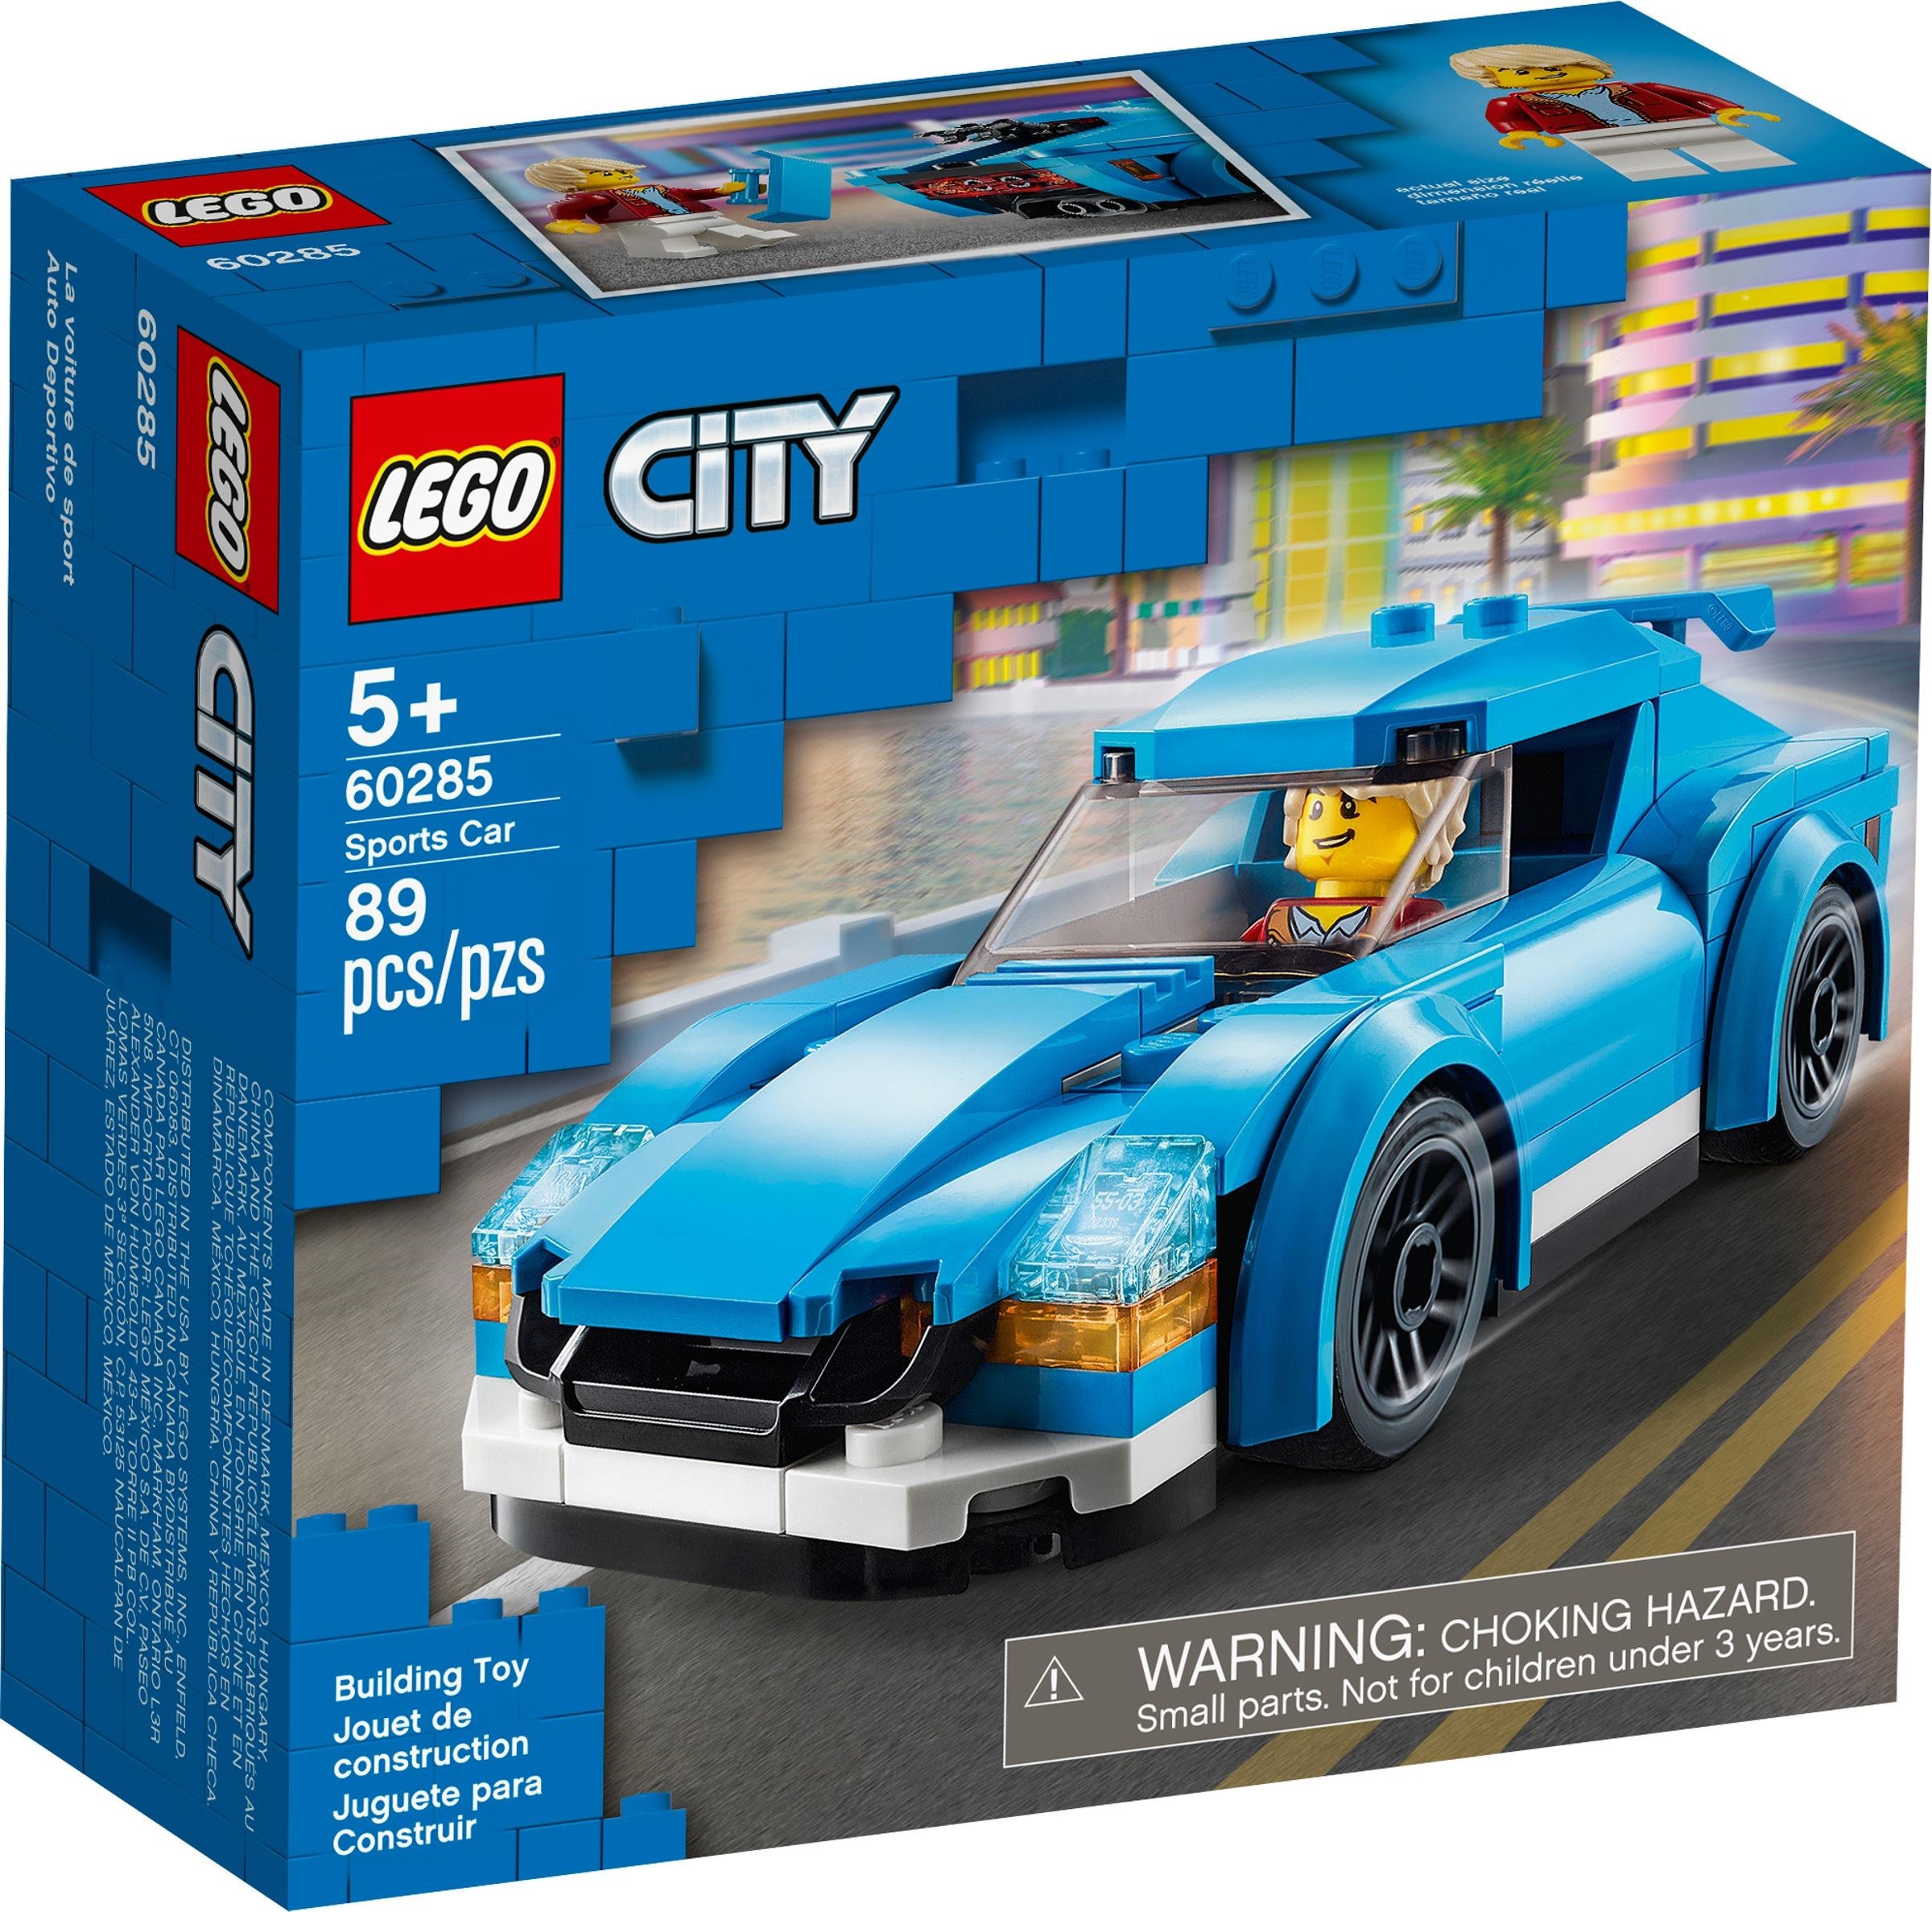 LEGO City Police Car 60312  Toys”R”Us China Official Website